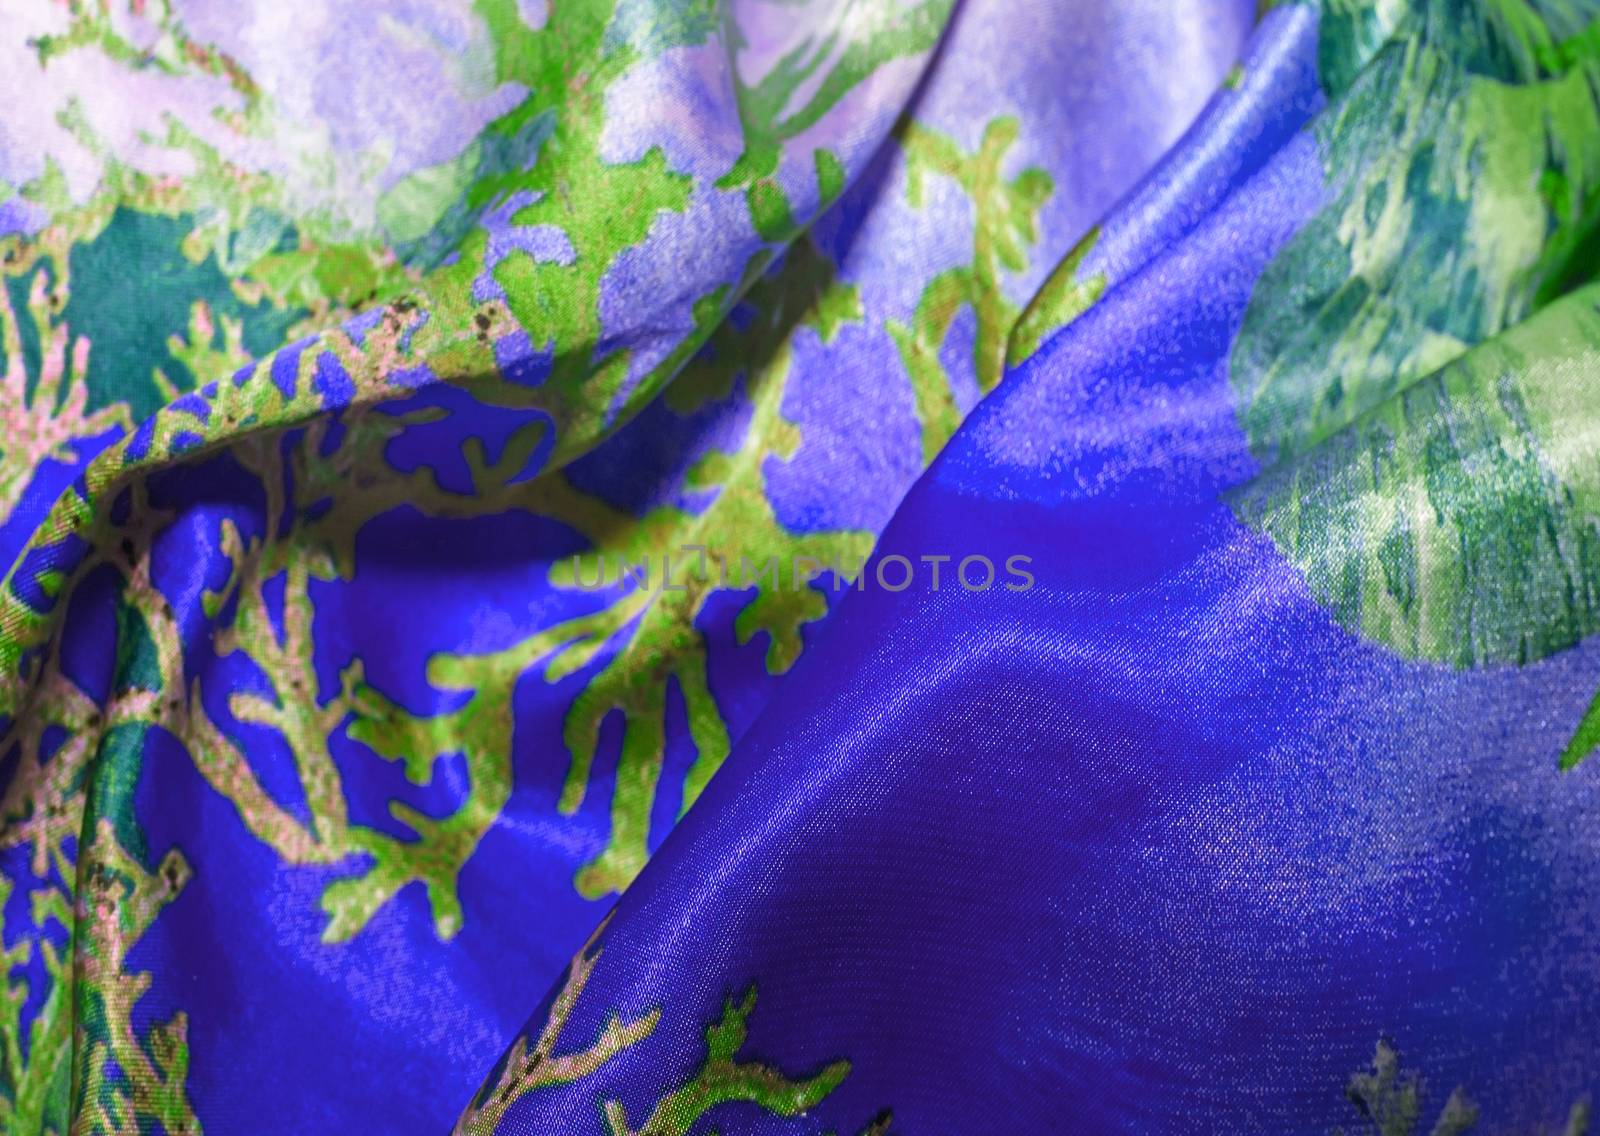 satin texture of colored fabric, for backgrounds   by KoliadzynskaIryna